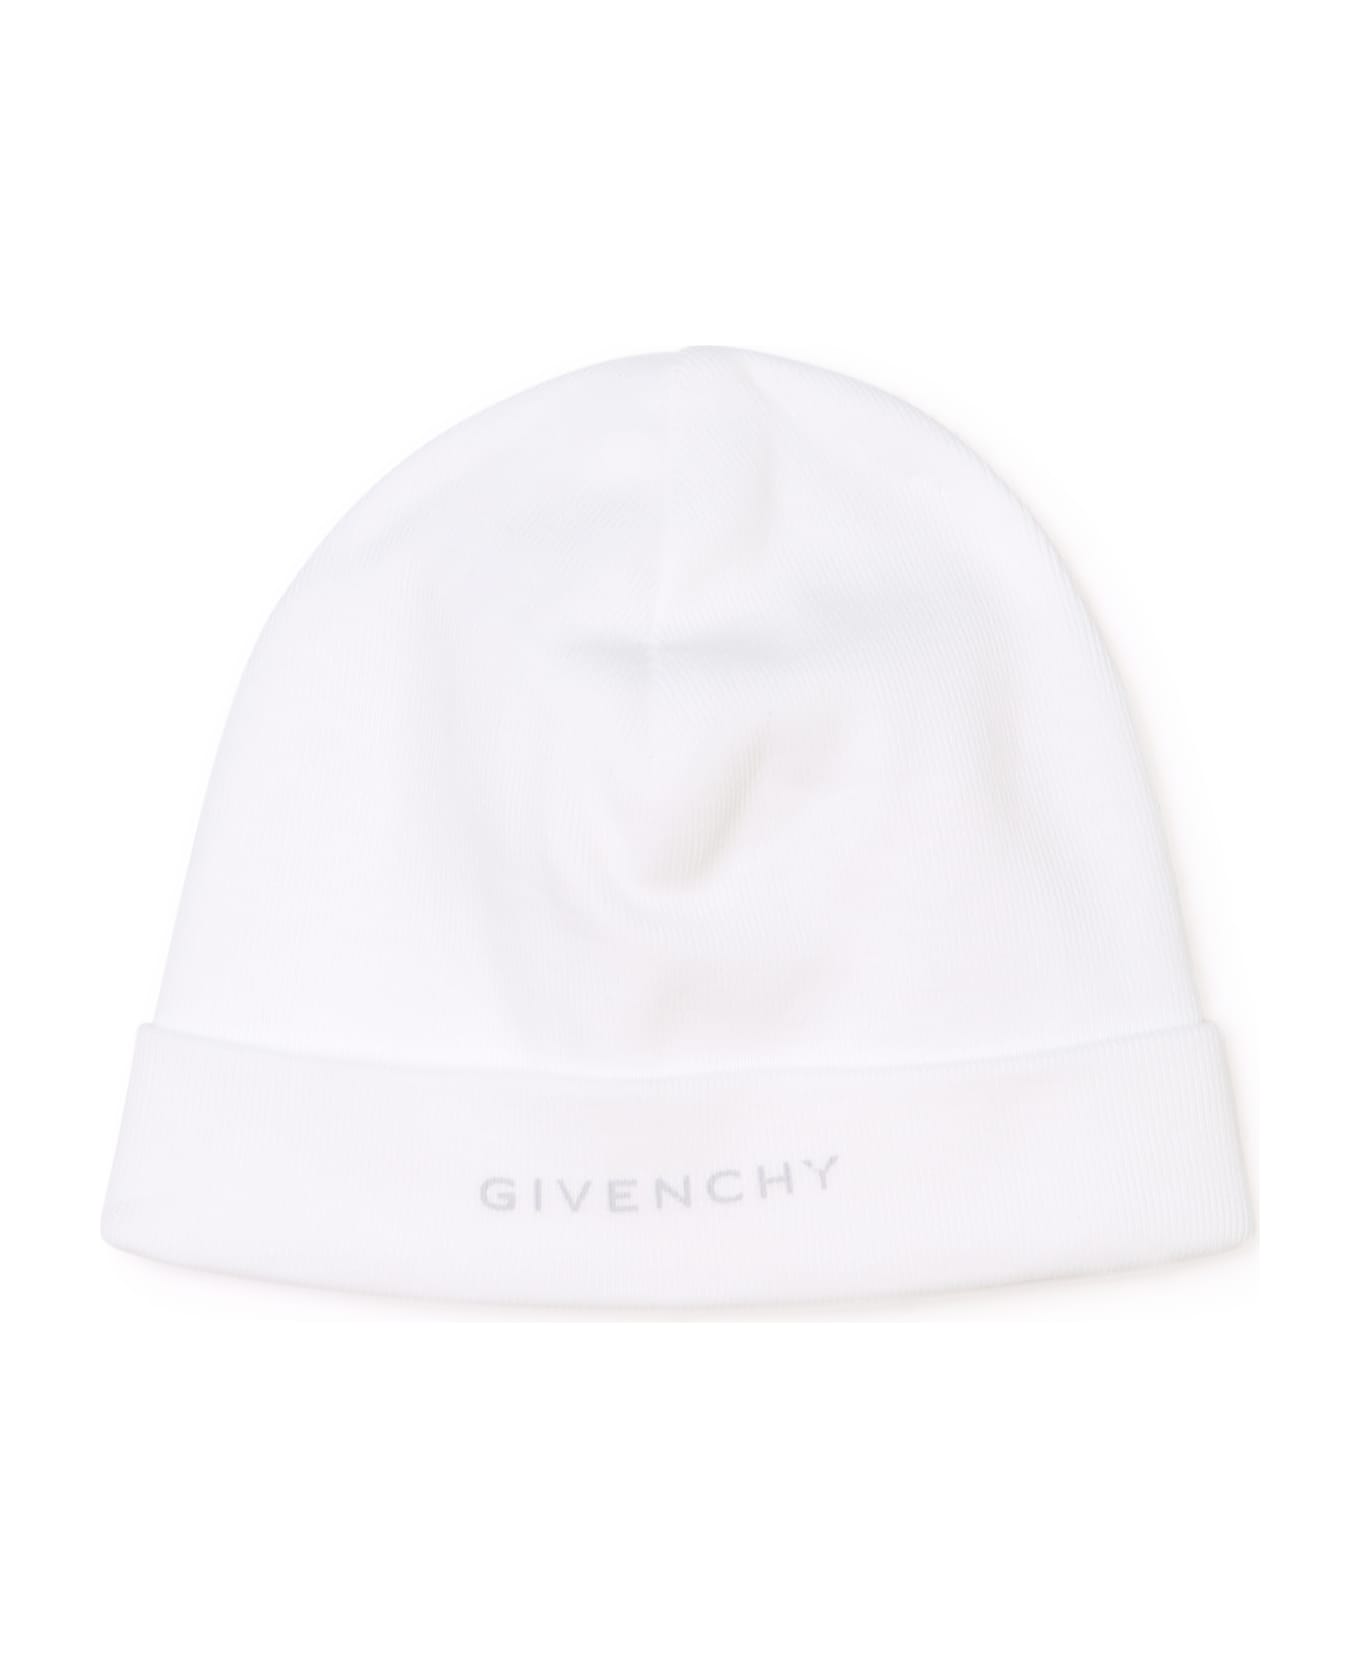 Givenchy 3-piece Baby Set With 4g Print - White